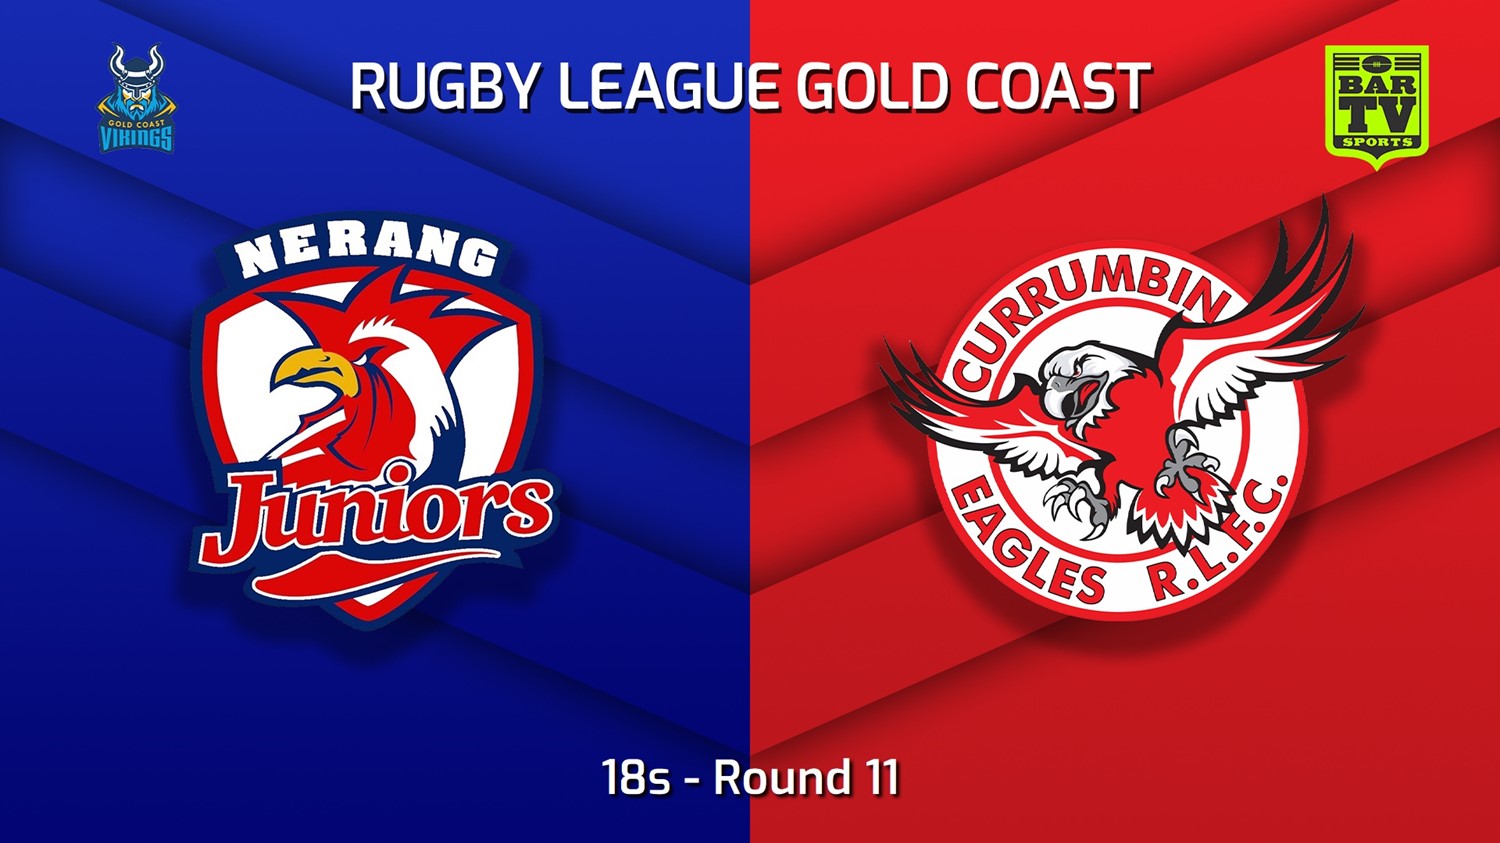 220618-Gold Coast Round 11 - 18s - Nerang Roosters v Currumbin Eagles Slate Image